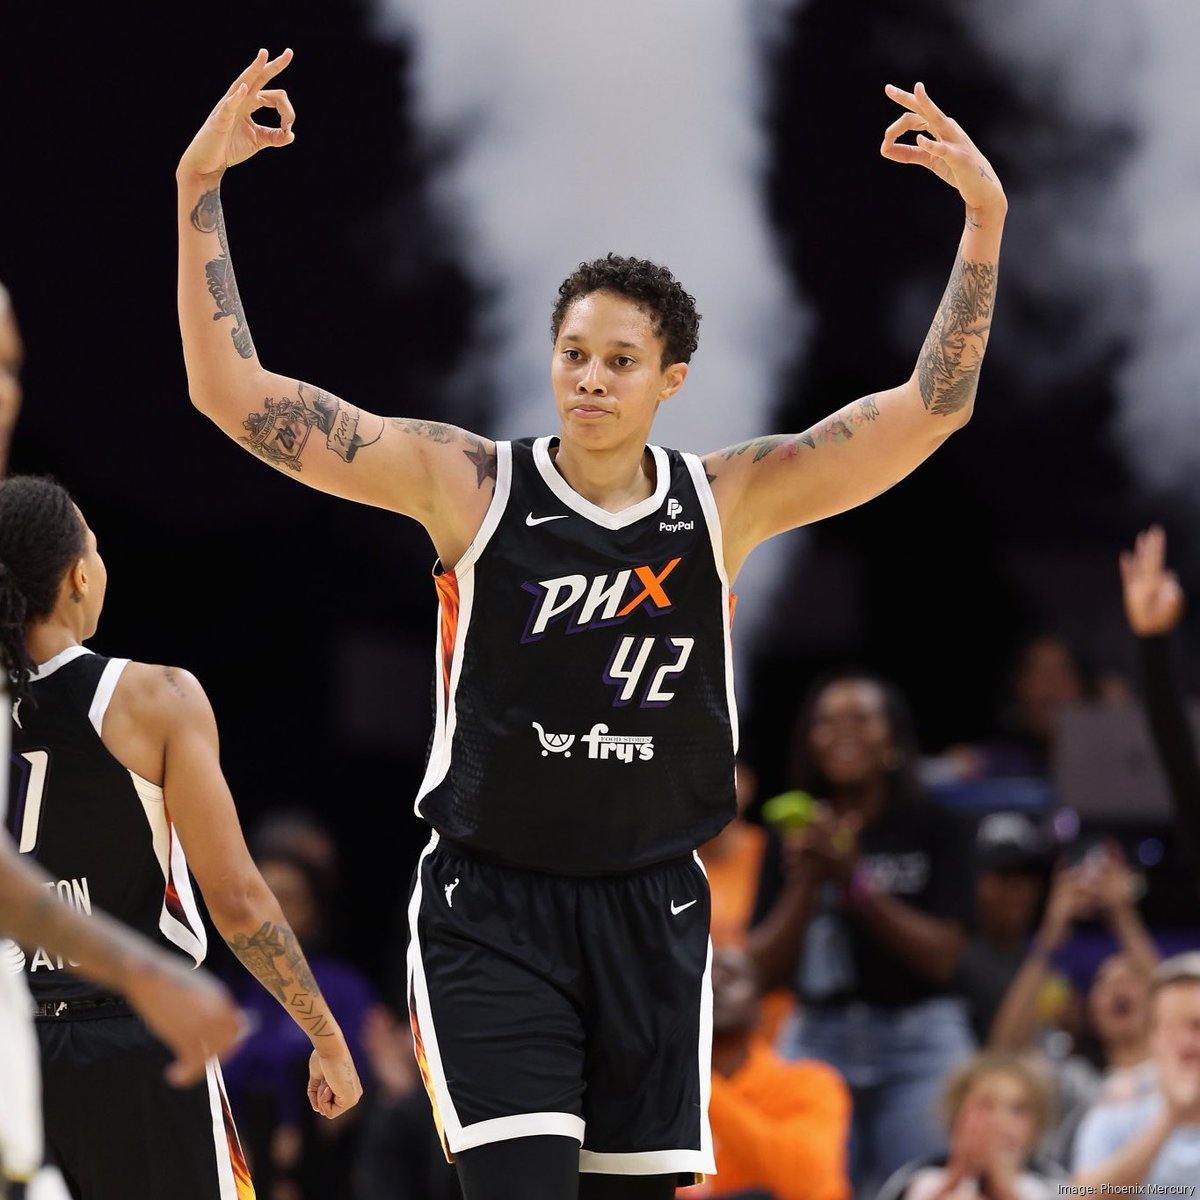 Brittney Griner re-signs with Phoenix Mercury for 2023 season